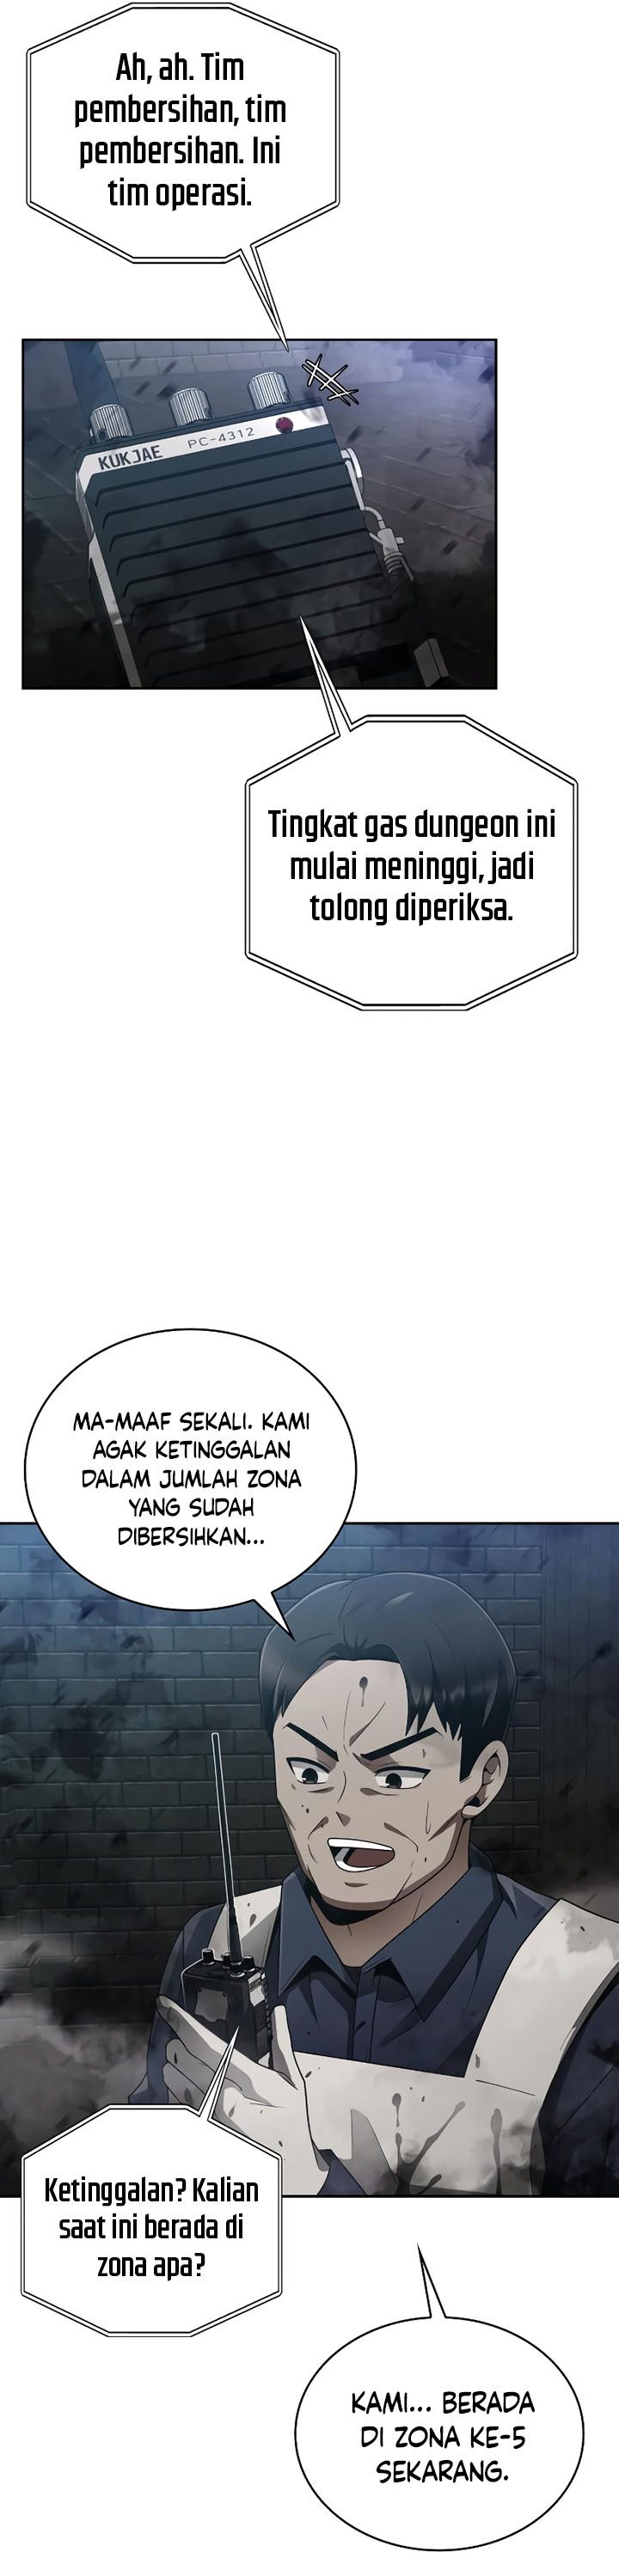 Dilarang COPAS - situs resmi www.mangacanblog.com - Komik clever cleaning life of the returned genius hunter 016 - chapter 16 17 Indonesia clever cleaning life of the returned genius hunter 016 - chapter 16 Terbaru 13|Baca Manga Komik Indonesia|Mangacan